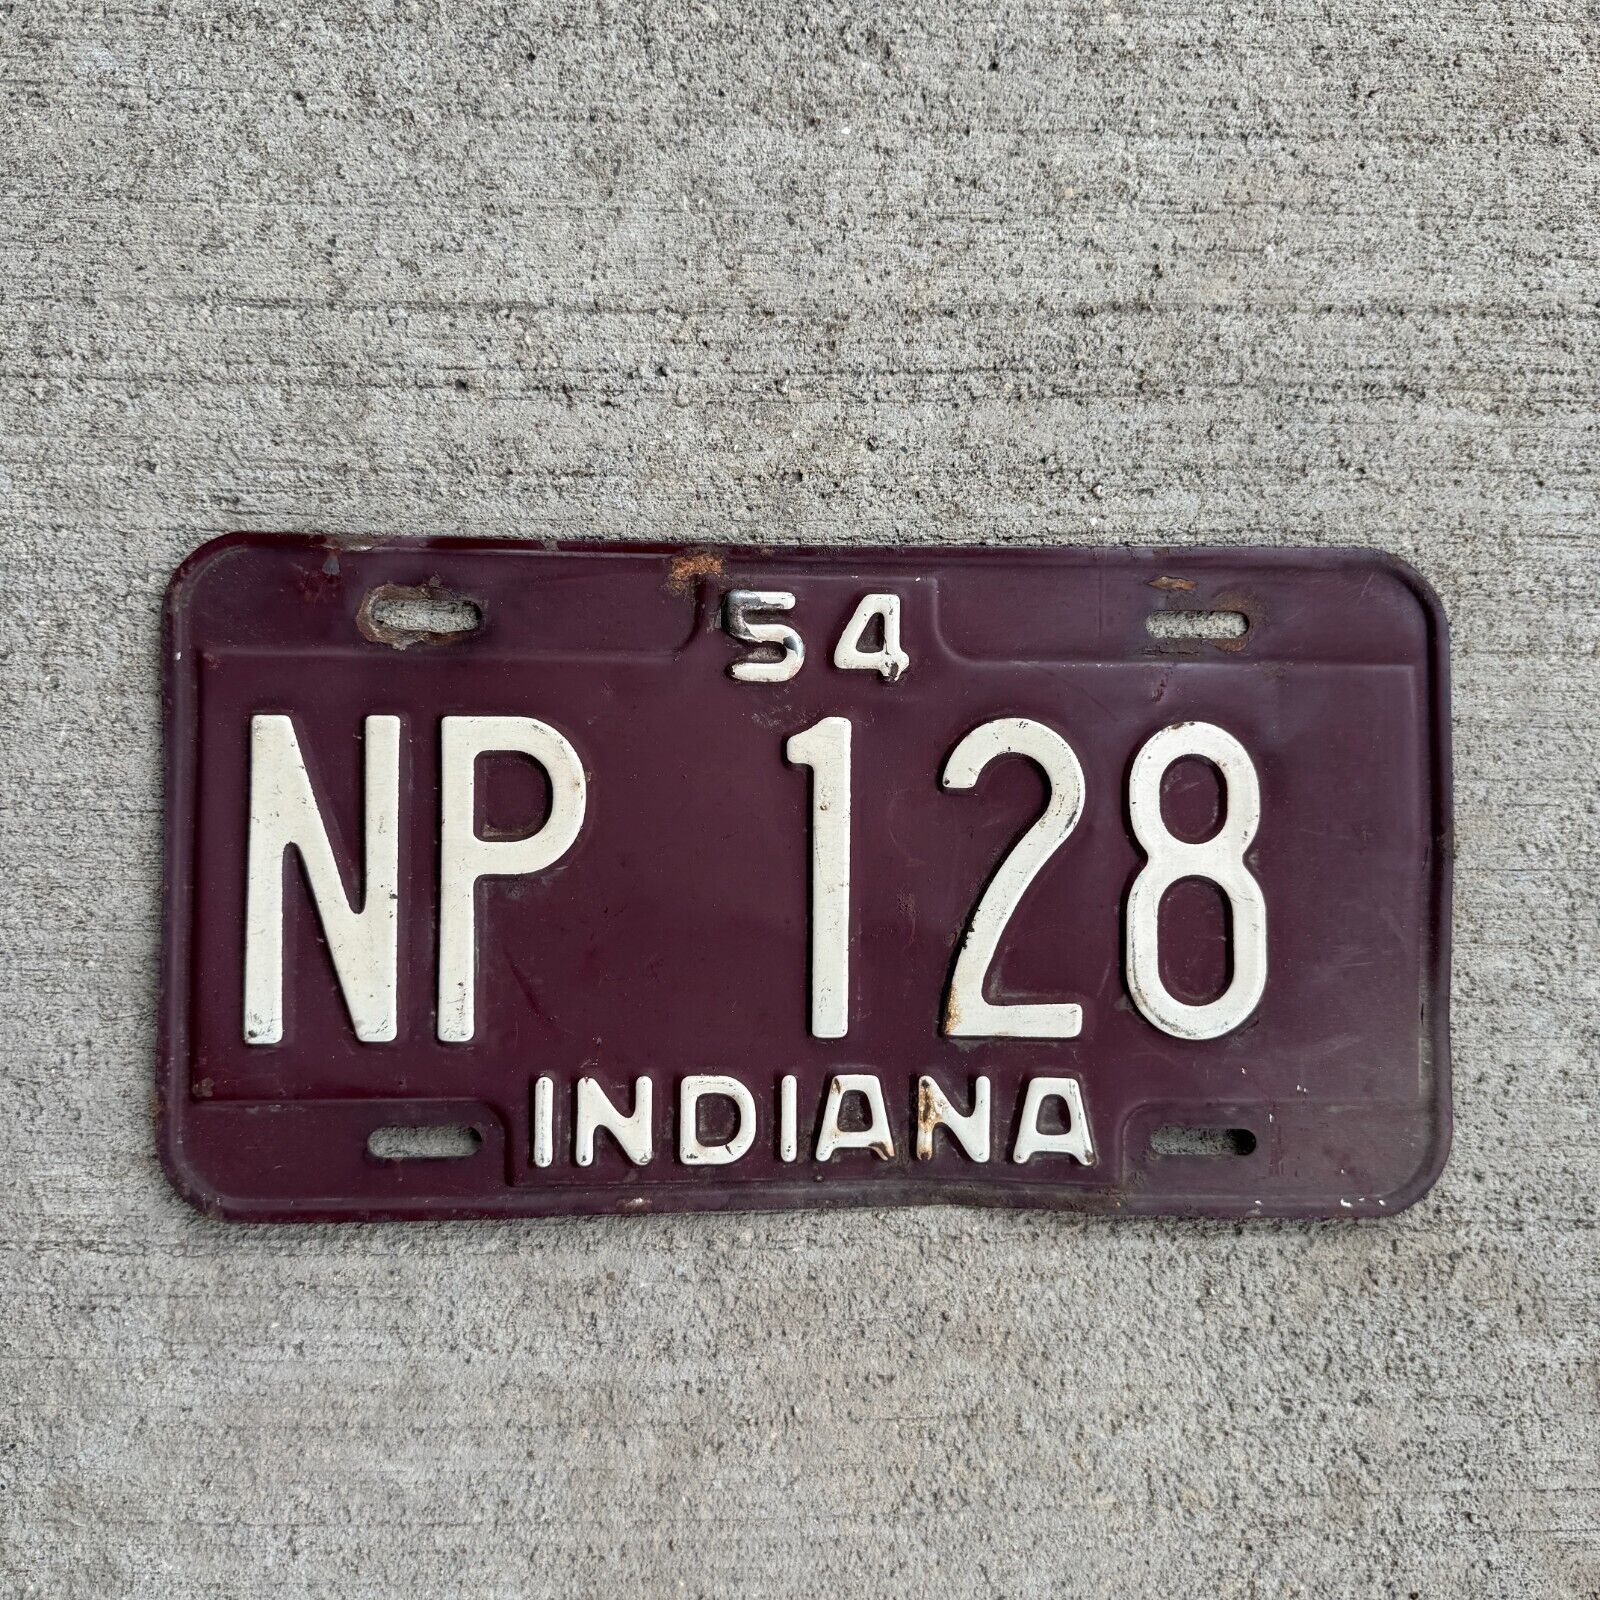 1954 Indiana License Plate Vintage Auto Tag Garage Wall Decor Red NP 128